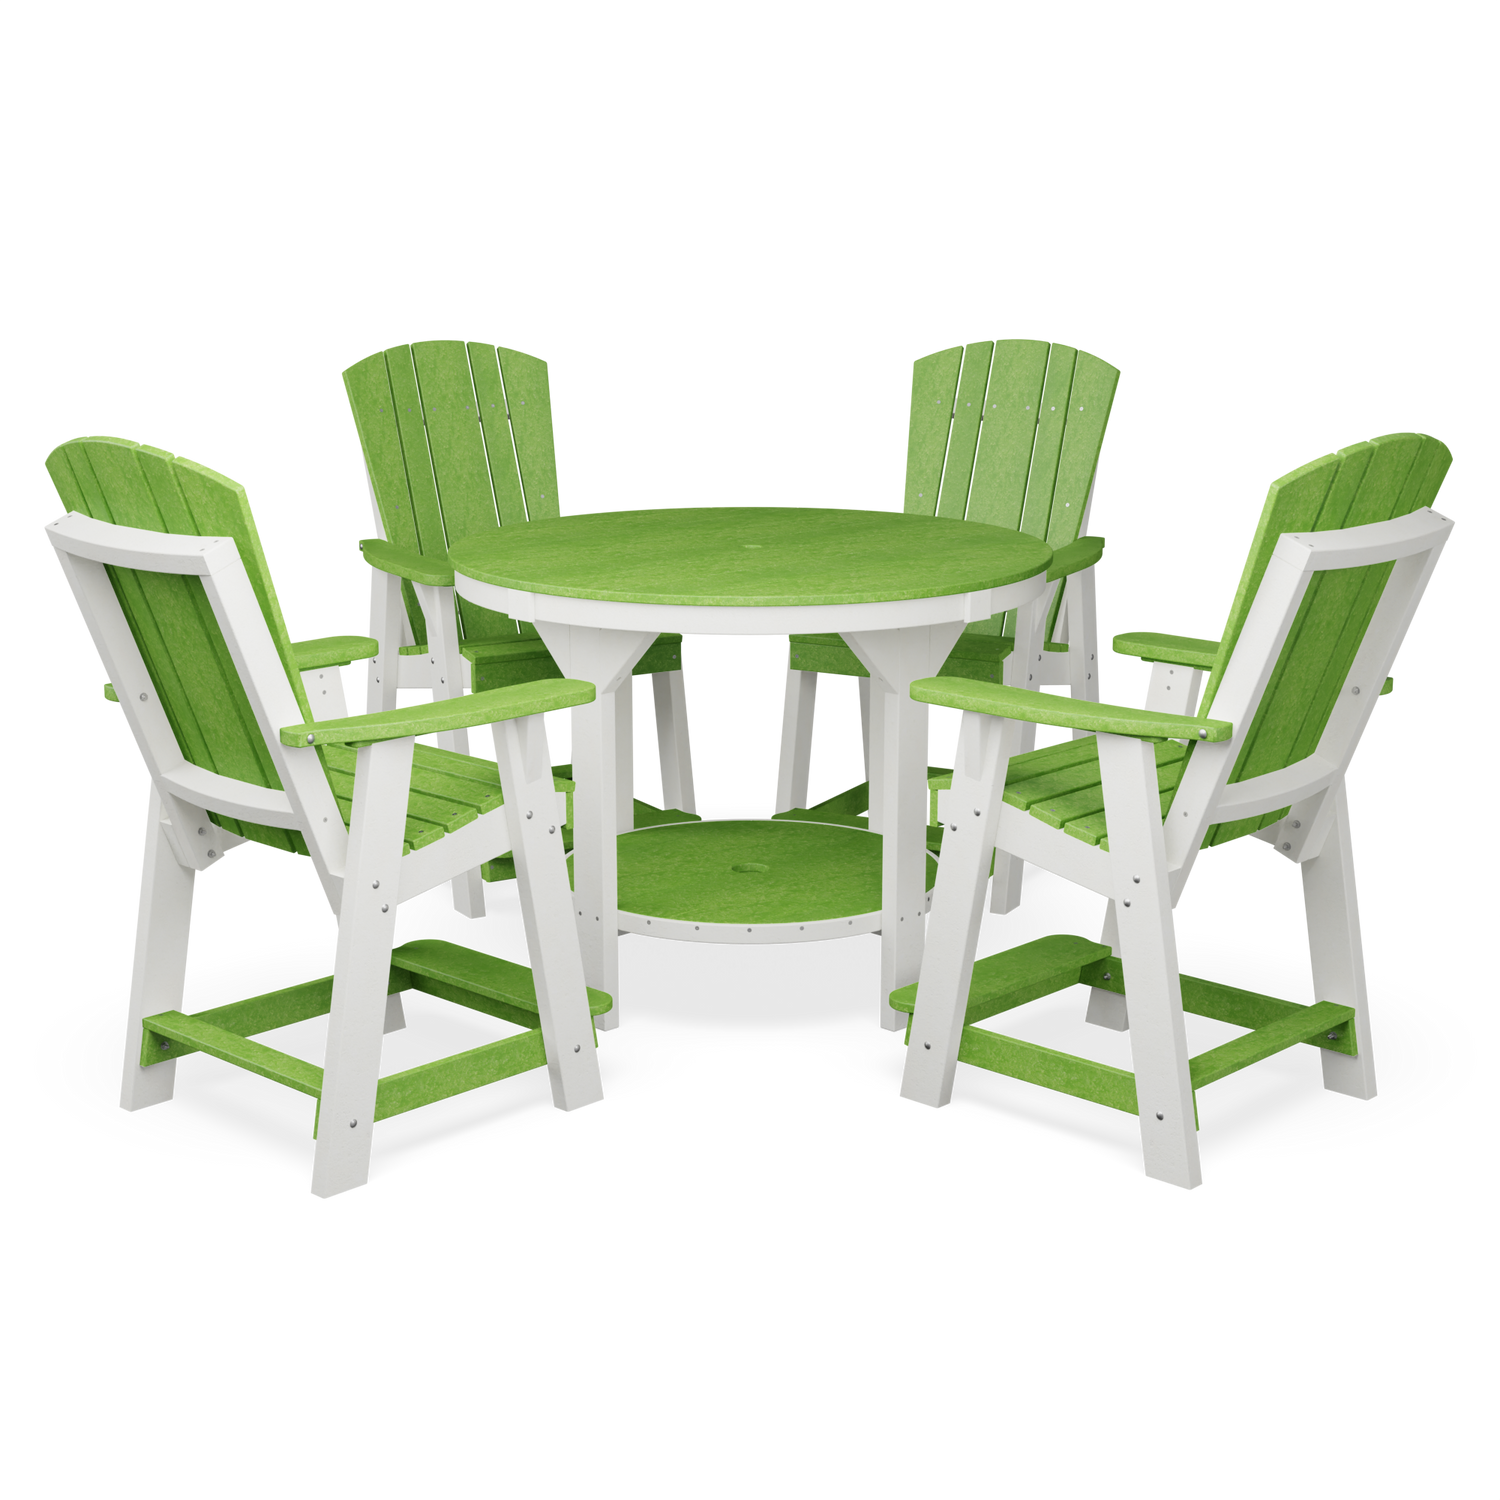 5 Piece Outdoor All Weather Table Sets